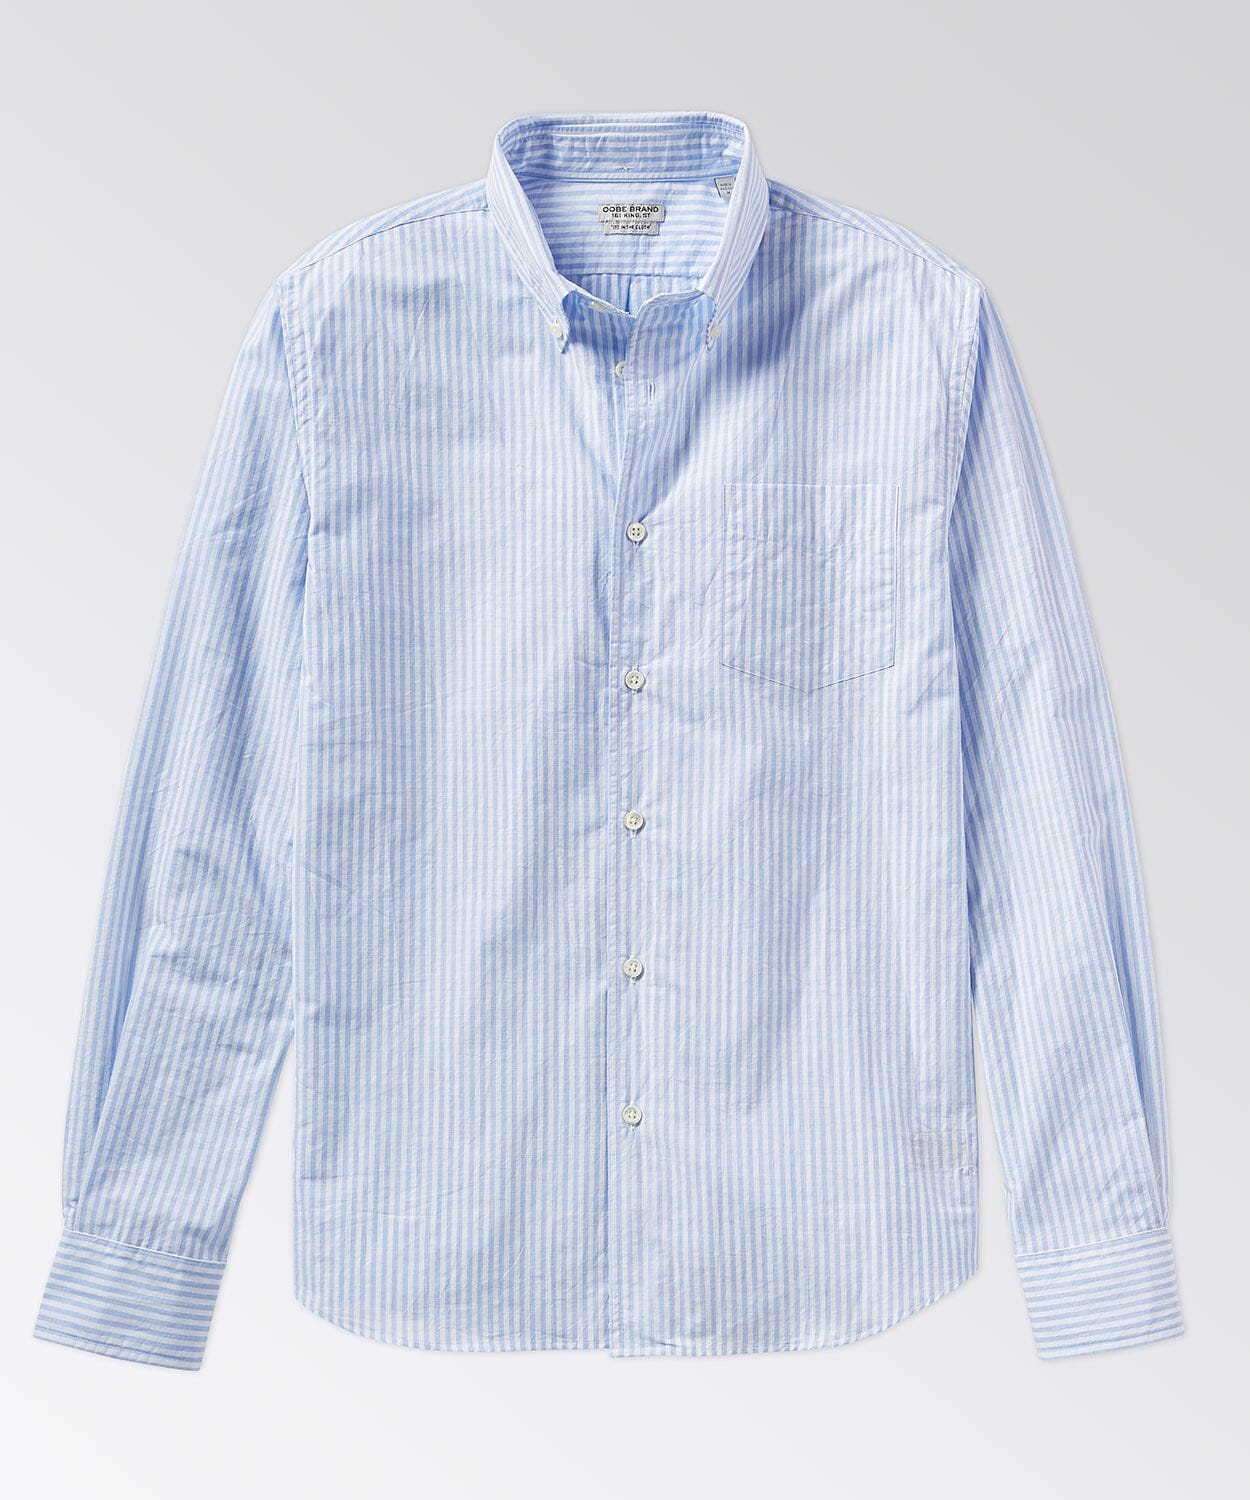 Excella Shirt Button Downs OOBE BRAND White / Light Blue S 